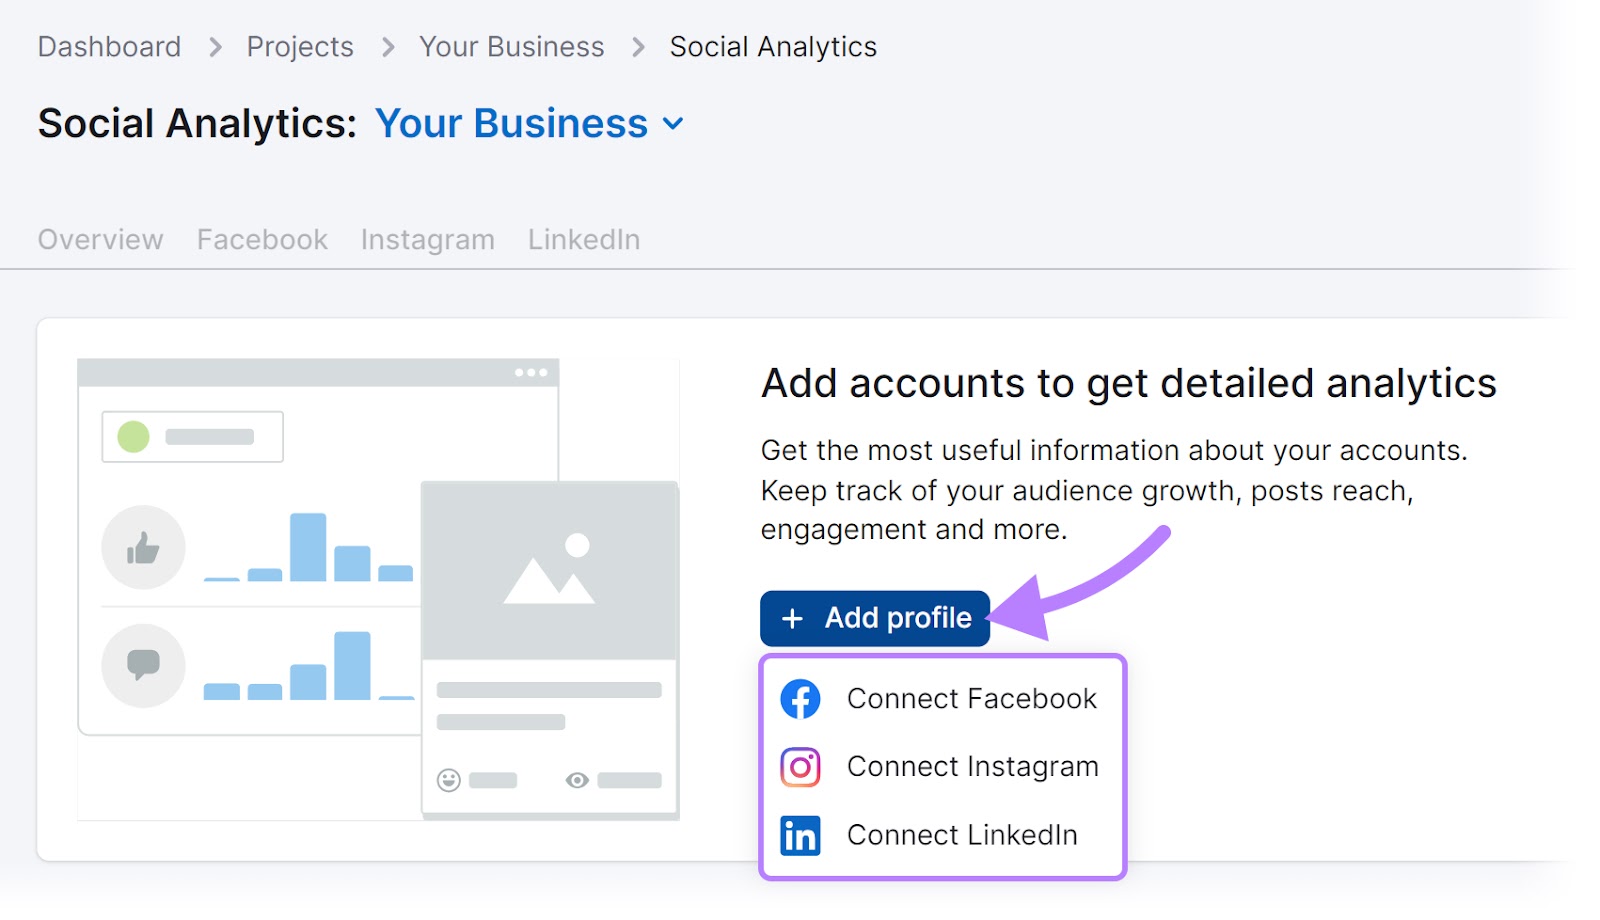 Connect Facebook, Instagram, and LinkedIn profiles to Social Analytics tool